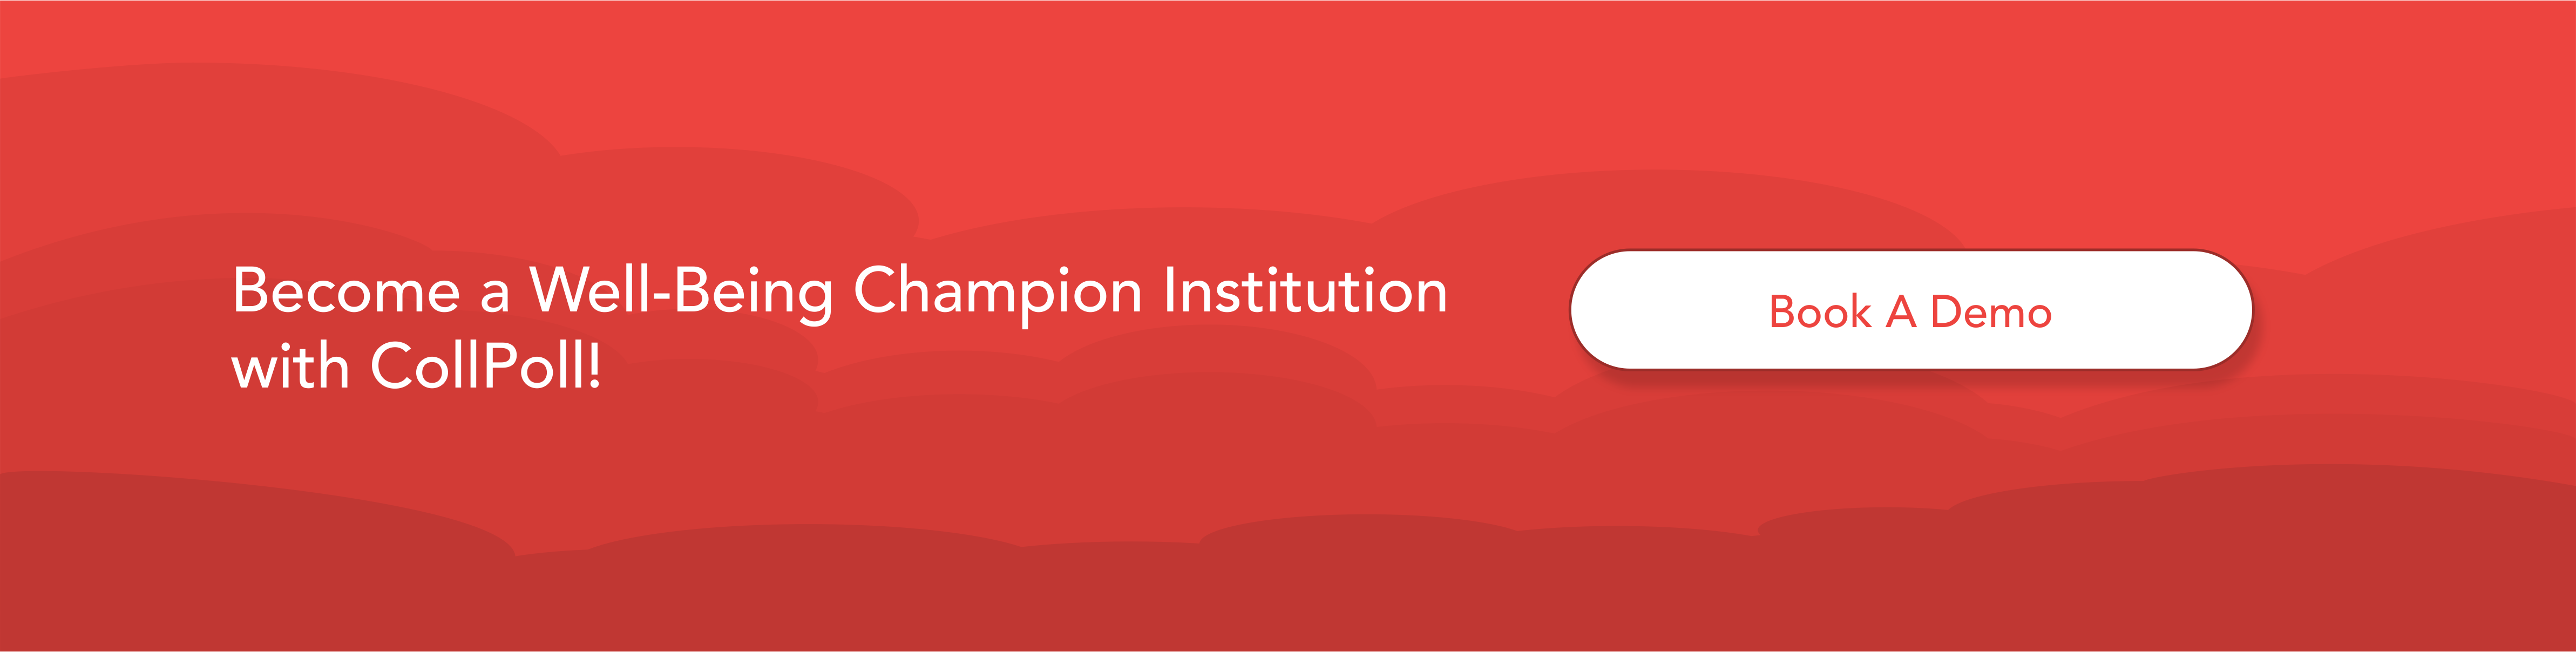 Become a Well-Being Champion Institution with CollPoll!